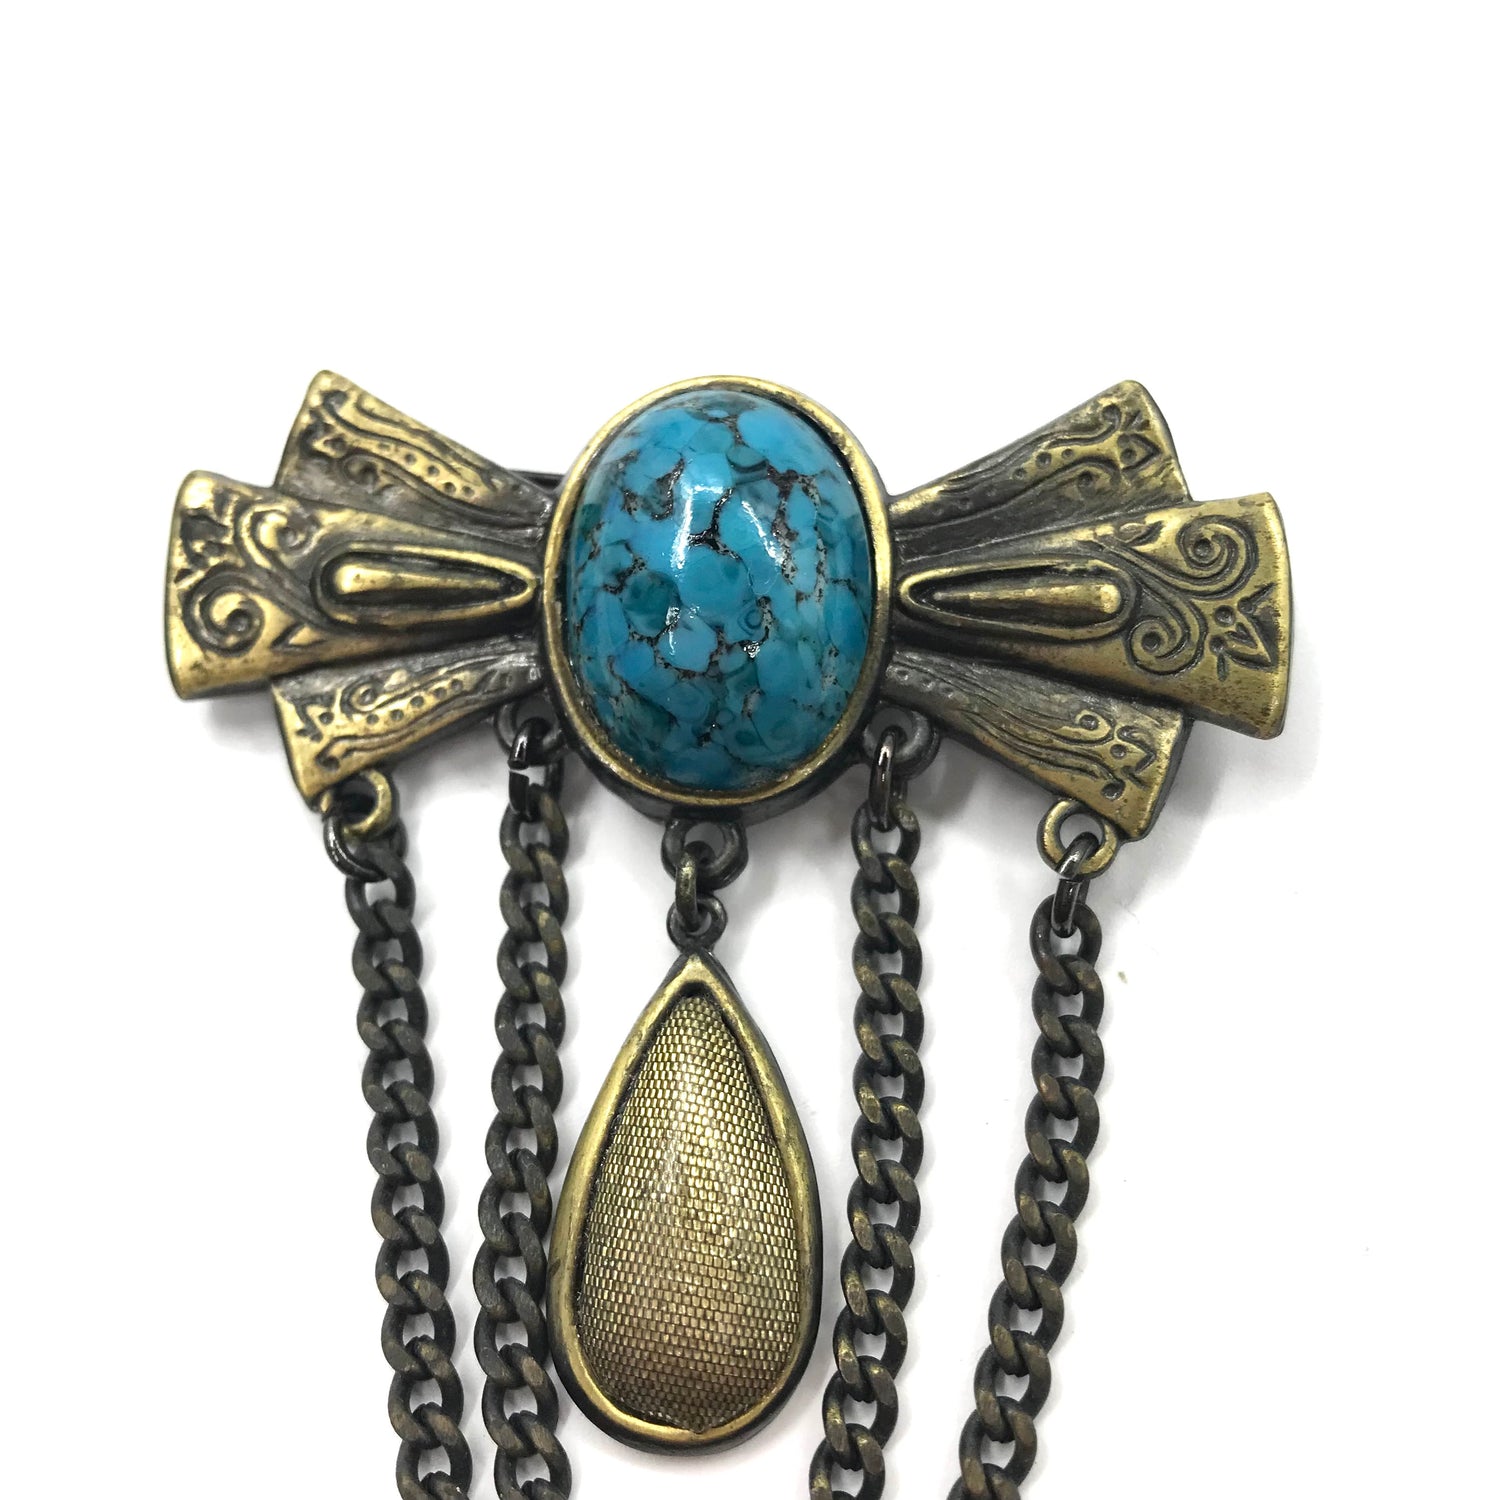 Vintage Turquoise Broach ヴィンテージ ターコイズ ブローチ ブルー 